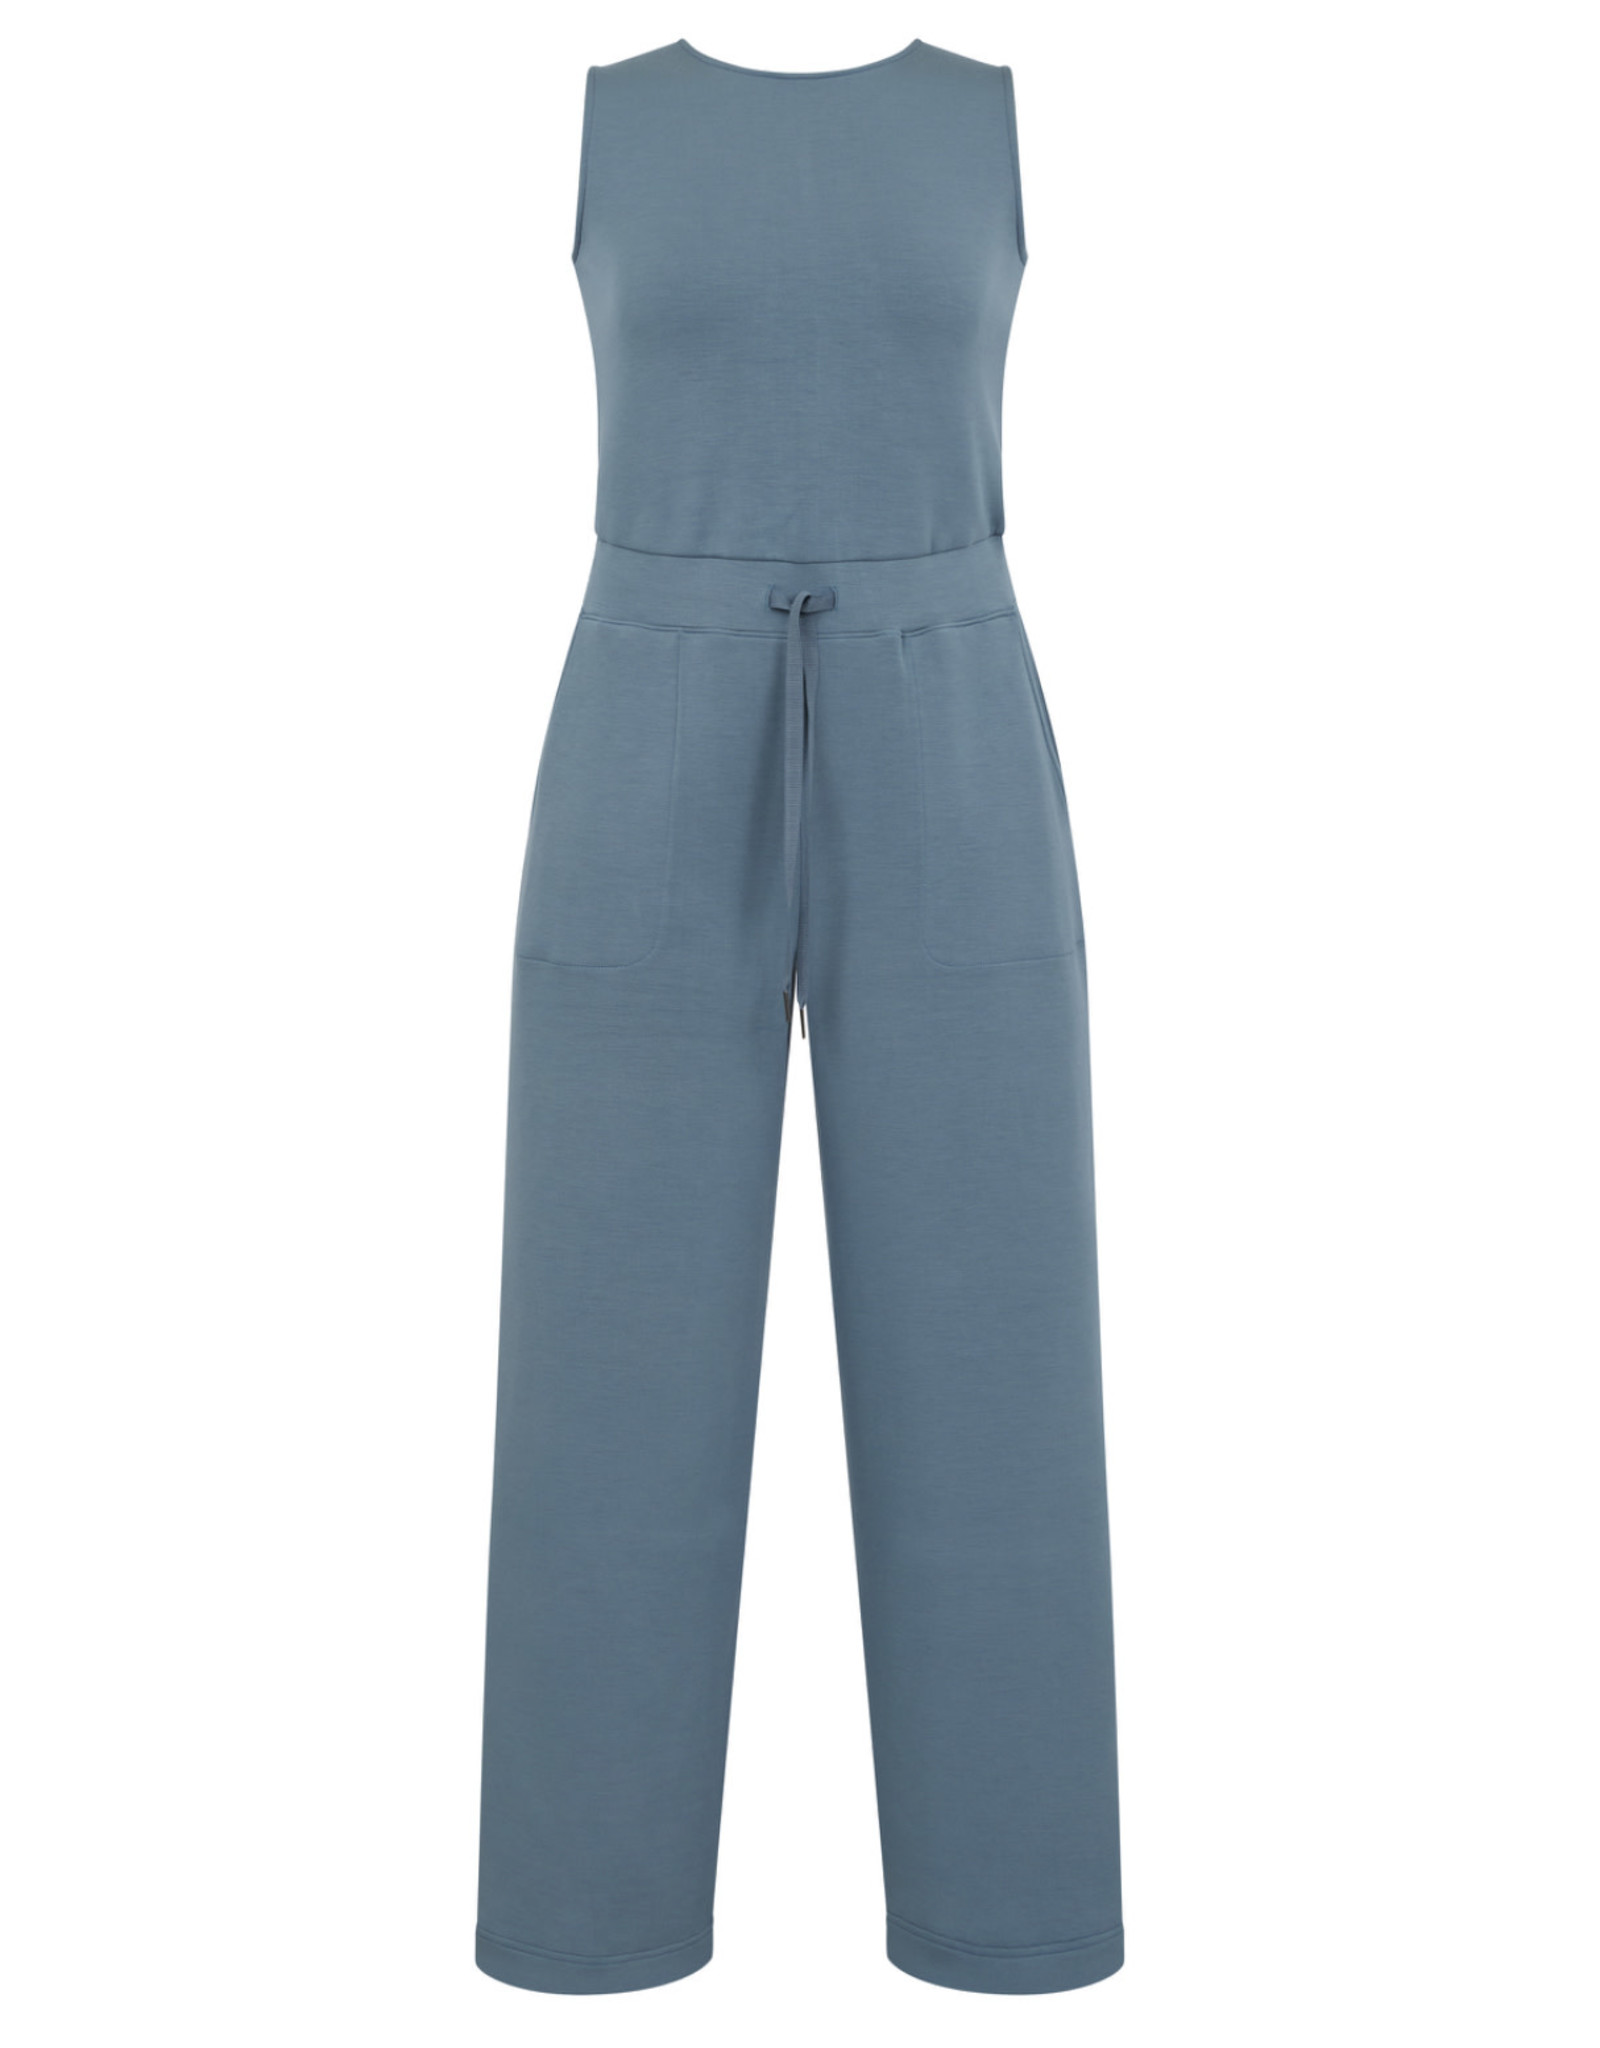 s version to the SPANX Air Essentials Jumpsuit. Is it worth it?